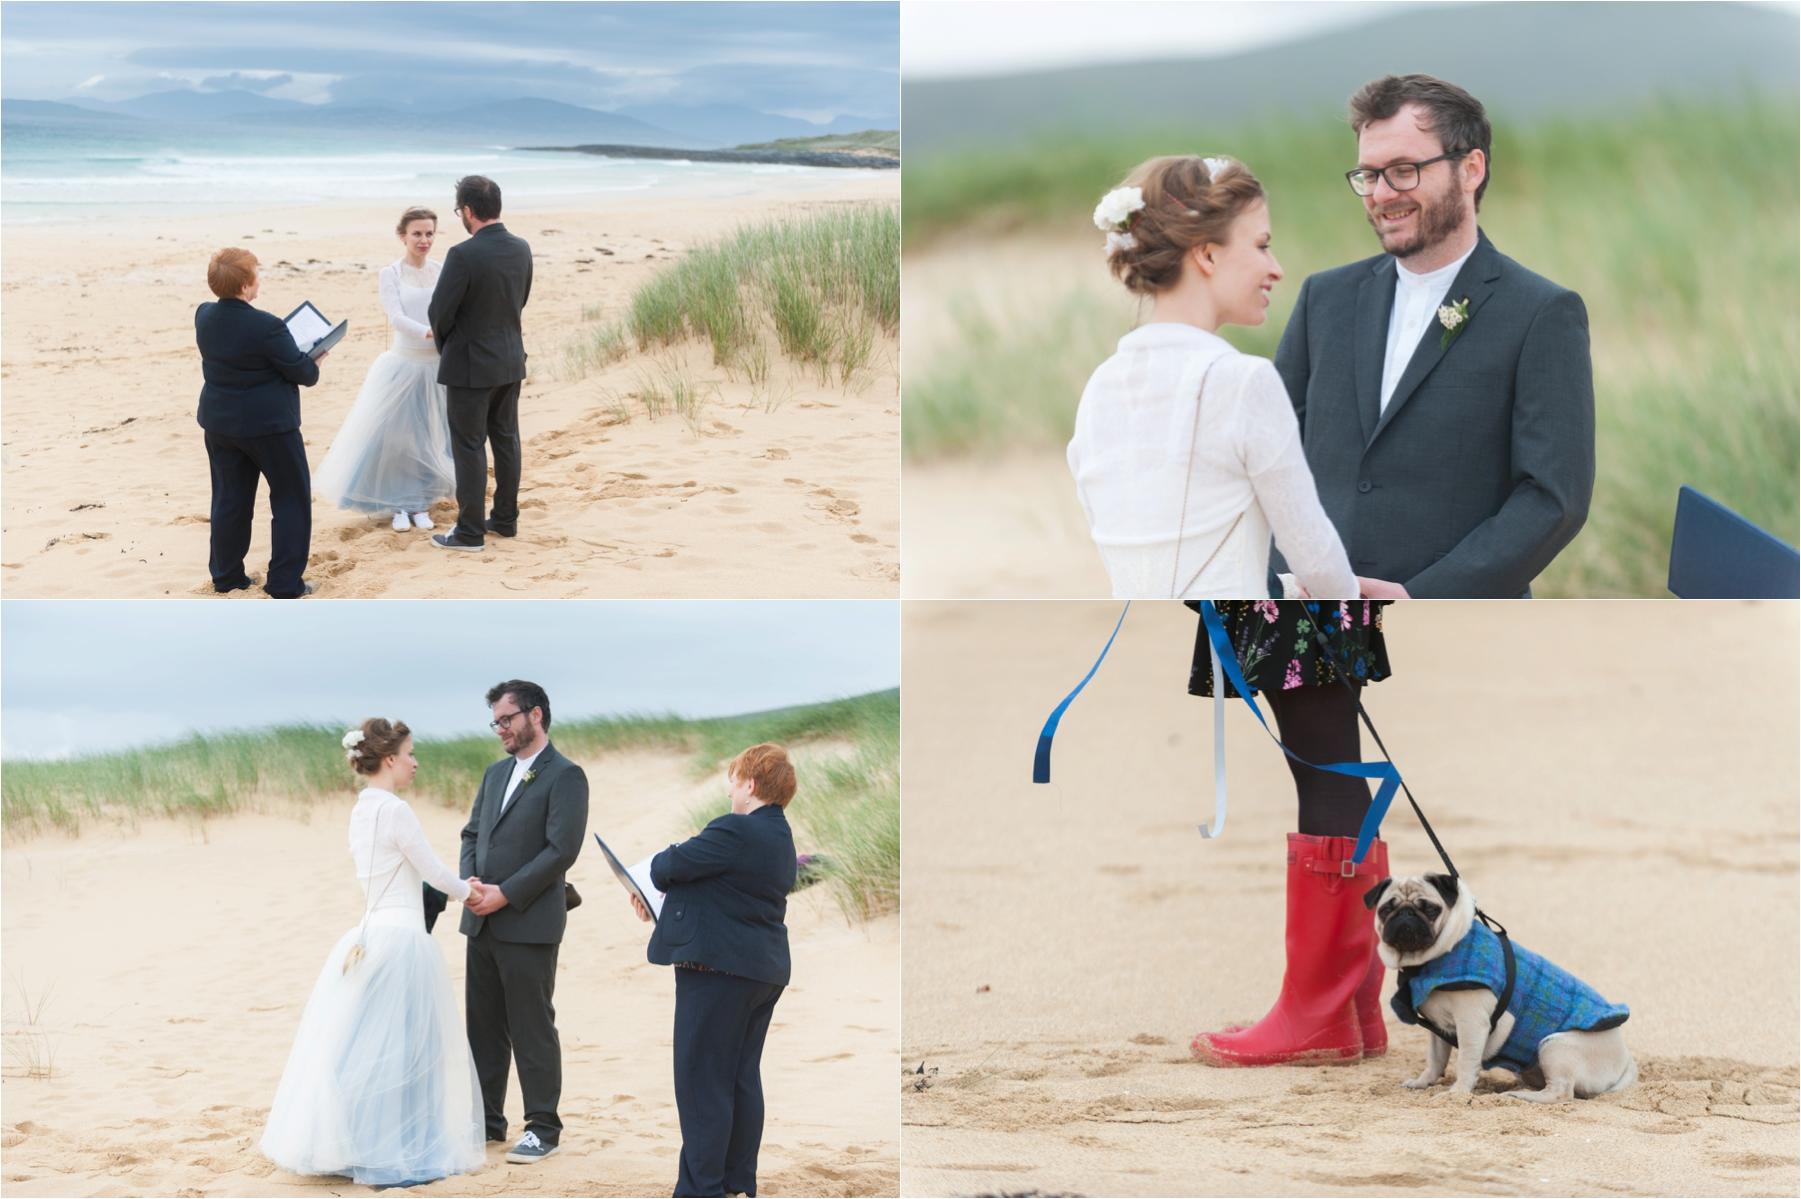 Beach wedding ceremony on the Isle of Harris. The bride and groom are exchanging vows and rings with a celebrant in front of their dog, a pug. 